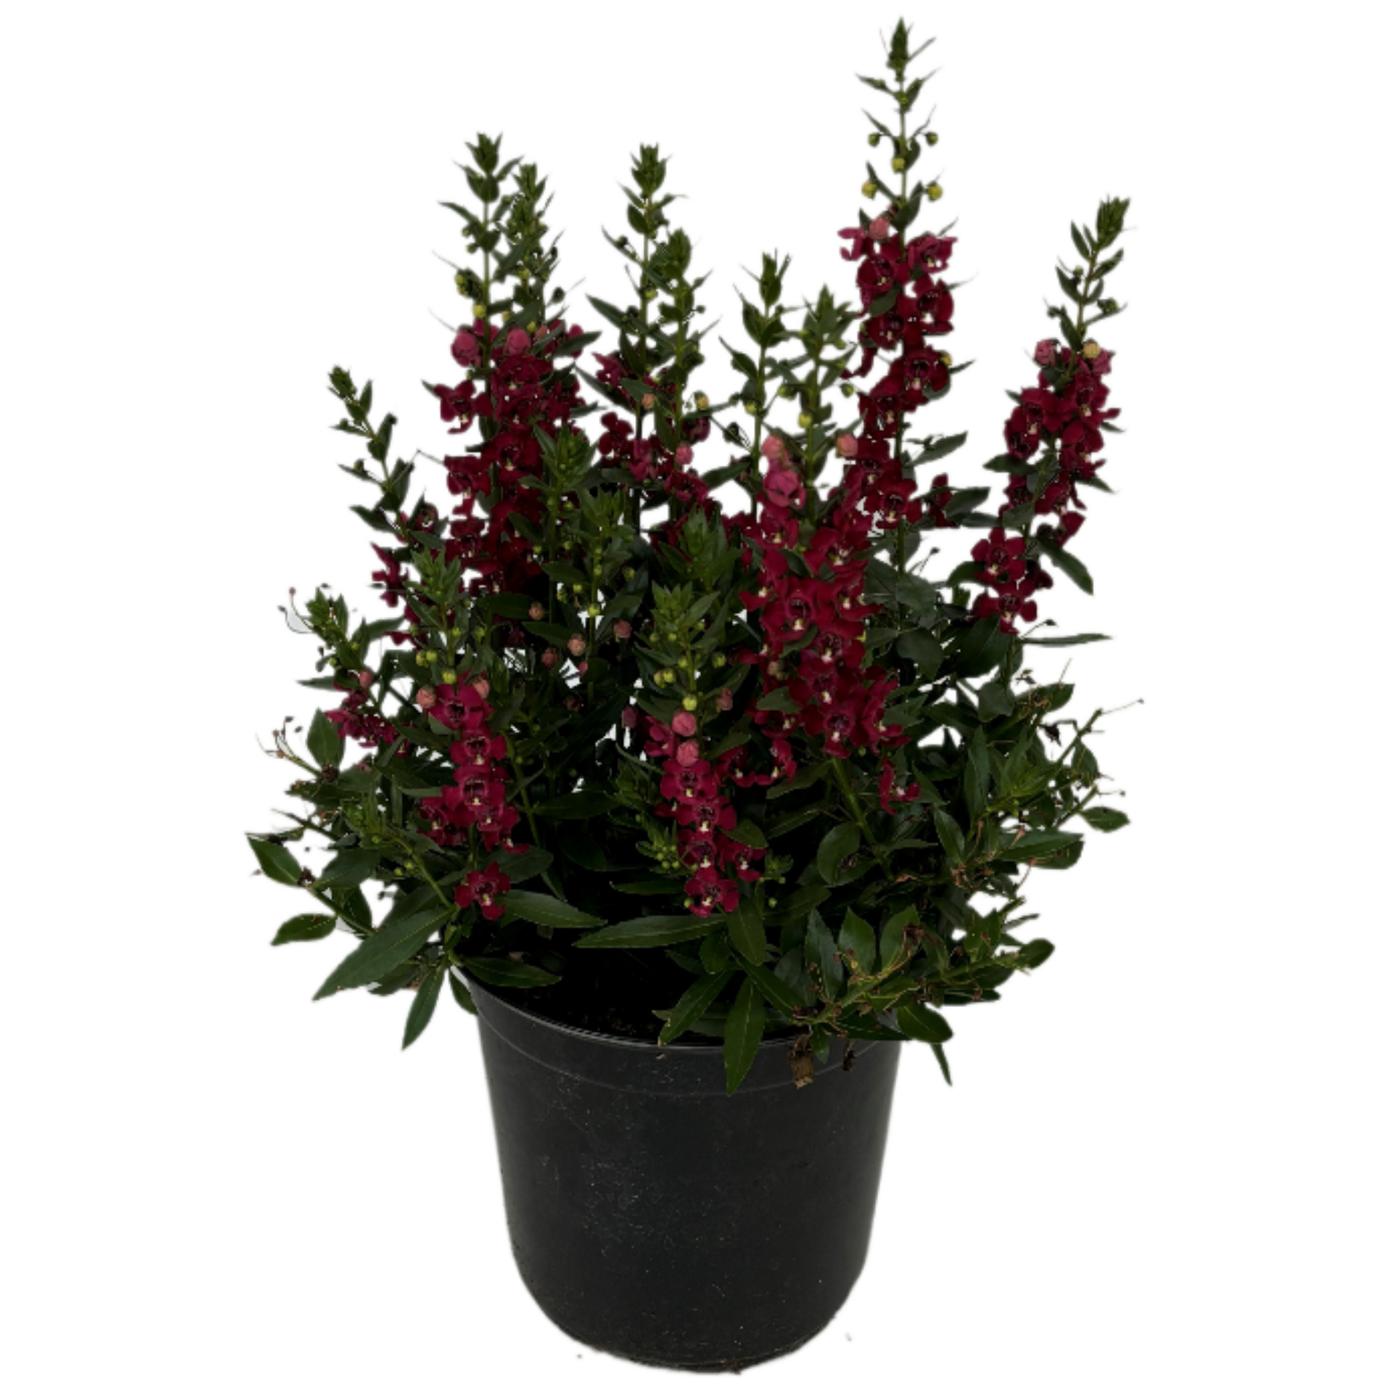 H-E-B Texas Roots Ruby Sangria Angelonia ; image 1 of 2